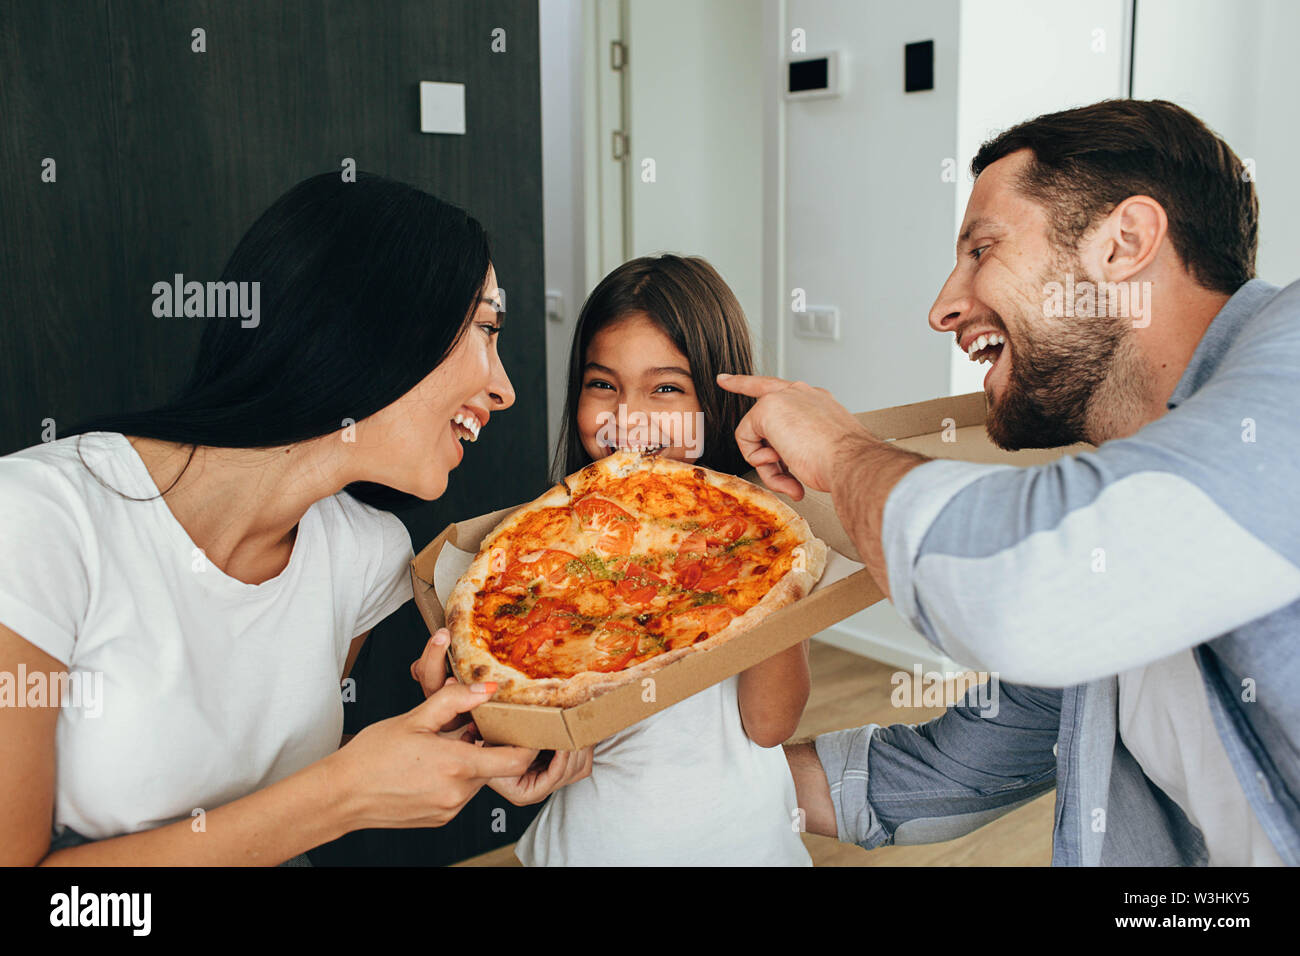 Eating tasty pizza with family. Funny little girl bitten piece of pizza, her parents laughing Stock Photo